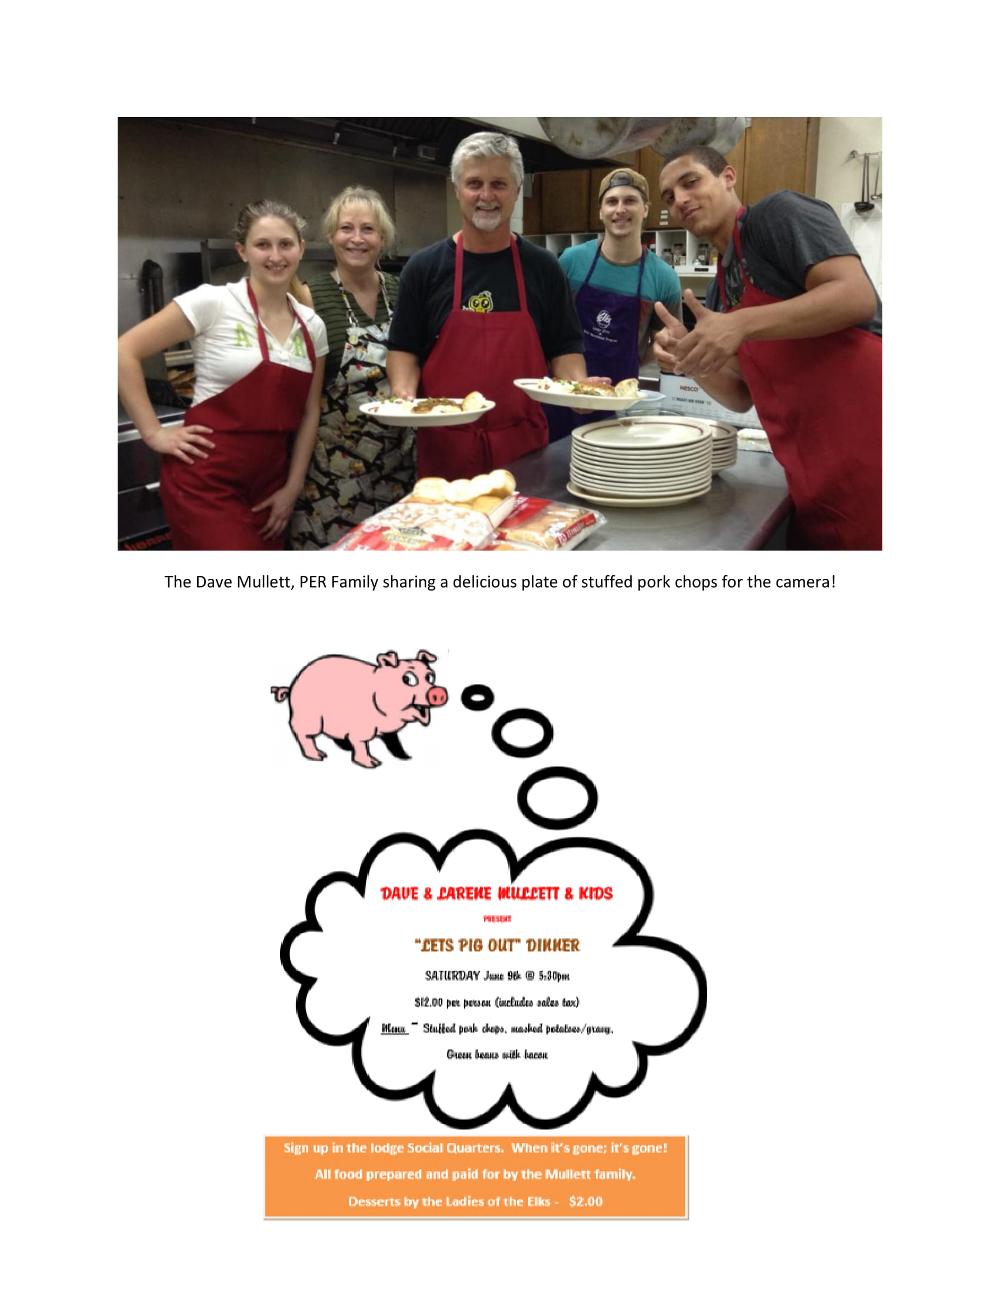 Dave & Larene Mullett with their family cooking the "Let's Pig Out Dinner" on June 9, 2018. Awesome dinner and fun atmosphere. Thank you all!